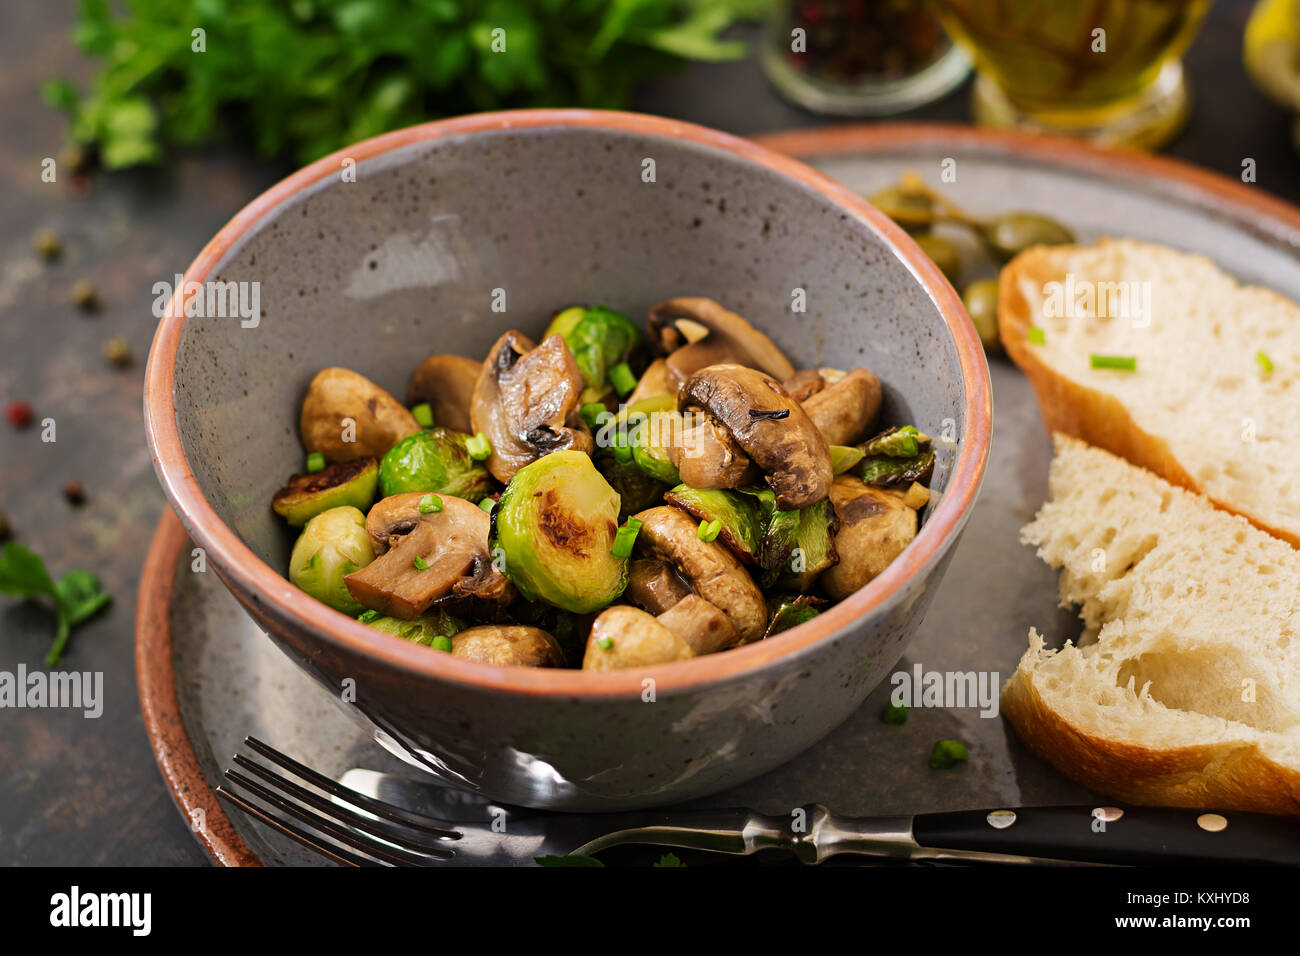 Vegan dish. Baked mushrooms with Brussels sprouts and herbs. Proper nutrition. Healthy lifestyle Stock Photo